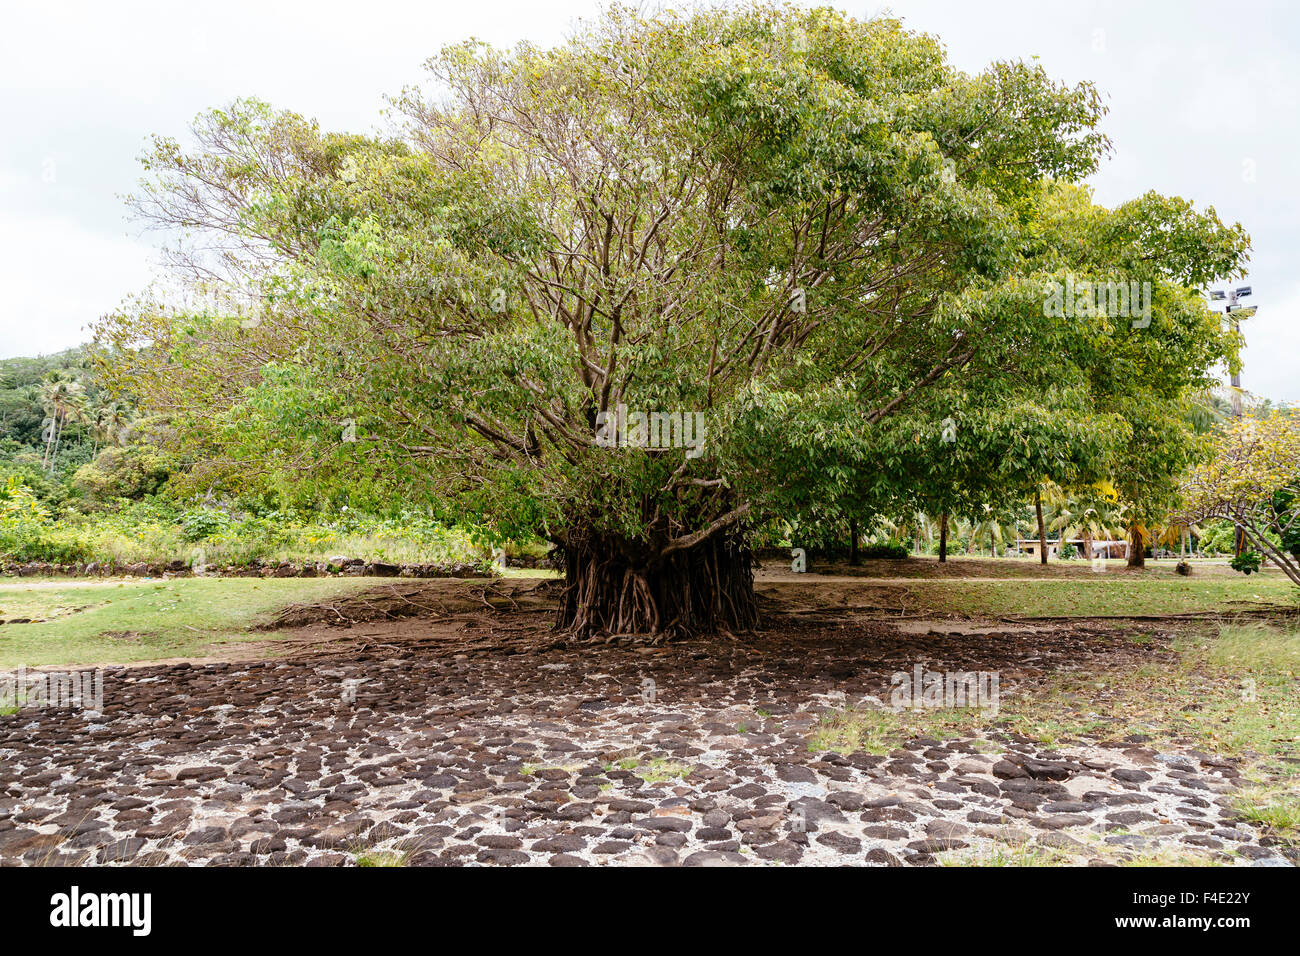 Pacific Ocean, French Polynesia, Society Islands, Raiatea. Tree at Taputapuatea Marae, once considered the central temple and religious center of Eastern Polynesia. Stock Photo